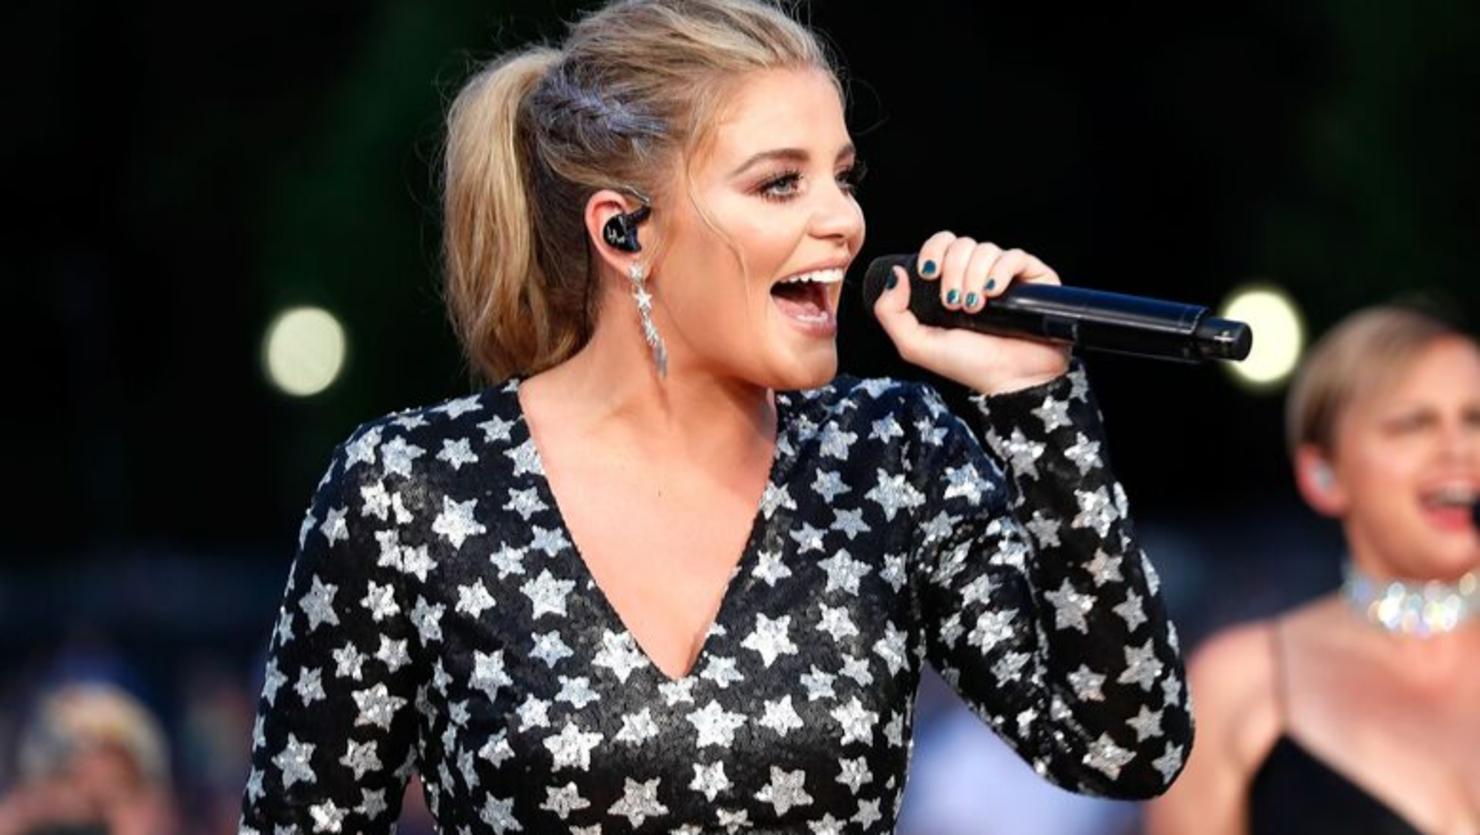 Lauren Alaina's New Song 'Getting Good' Is A Reminder To Live In The Moment